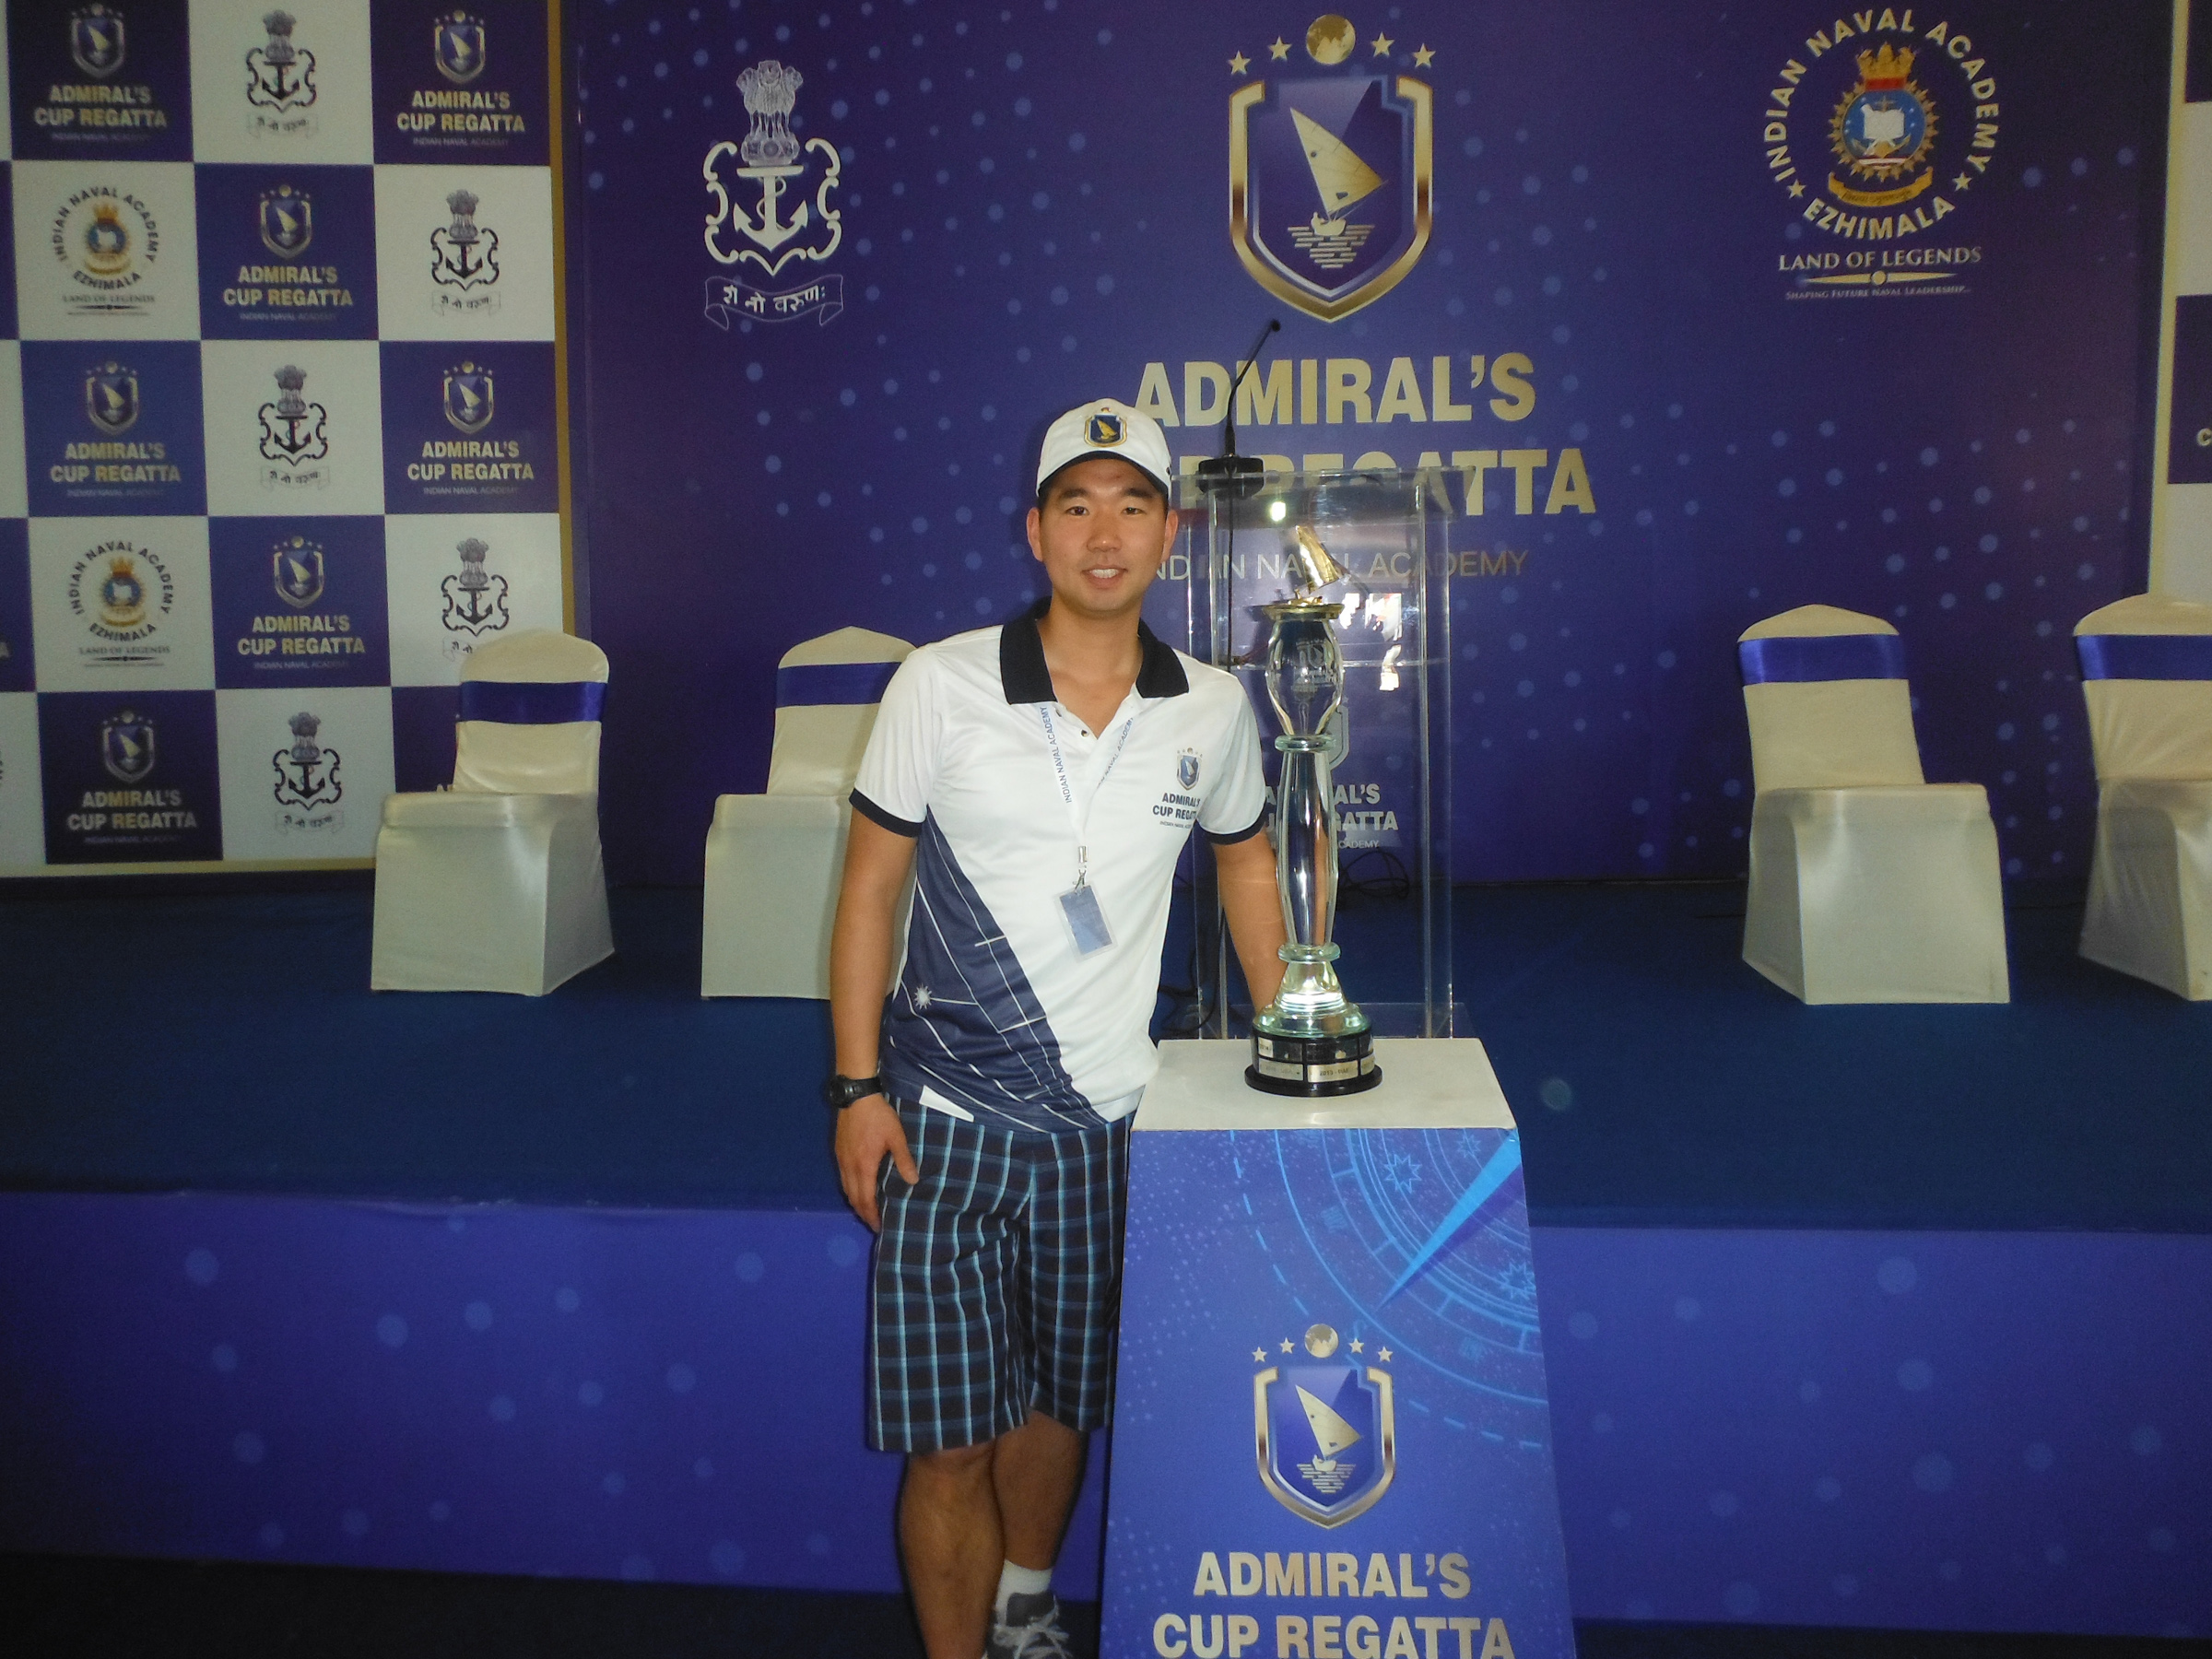 Lieutenant (Navy) James Lee, an Above Water Warfare Training Officer at Naval Fleet School (Pacific), poses with the Admiral’s Cup Regatta Trophy in Kerala State, India.